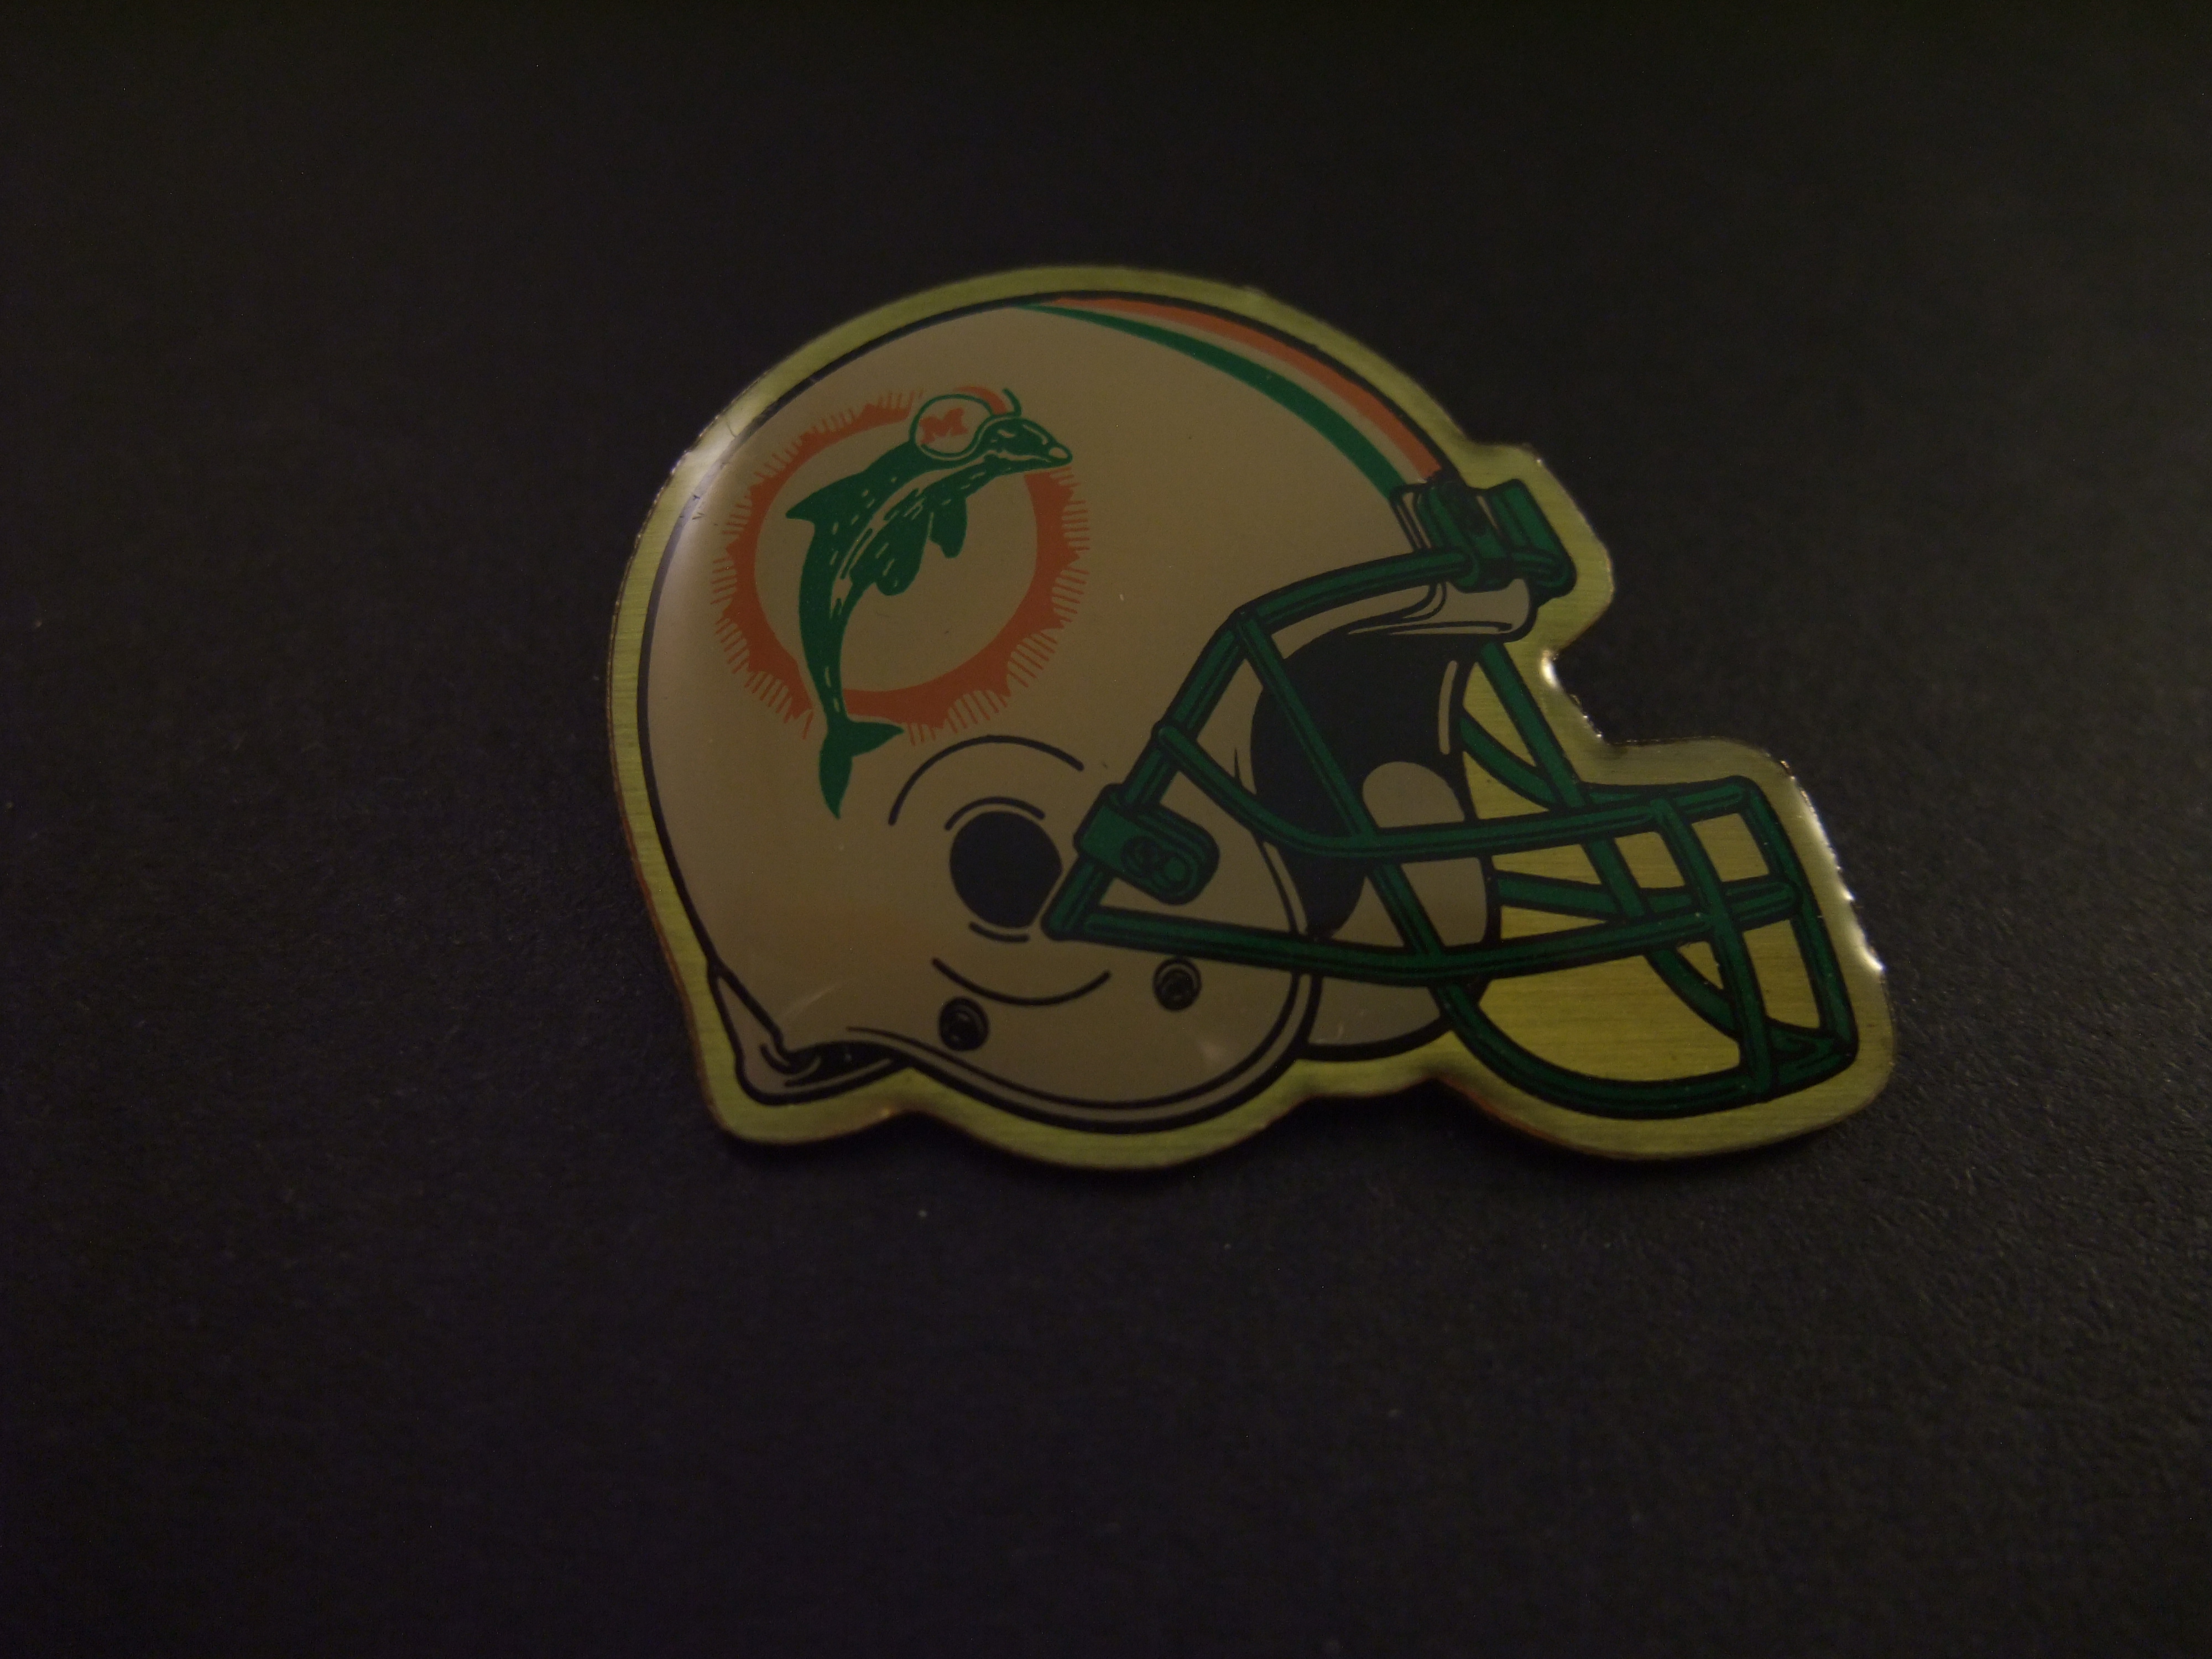 The Miami Dolphins ( Dolphins)American football-team ( NFL)helm